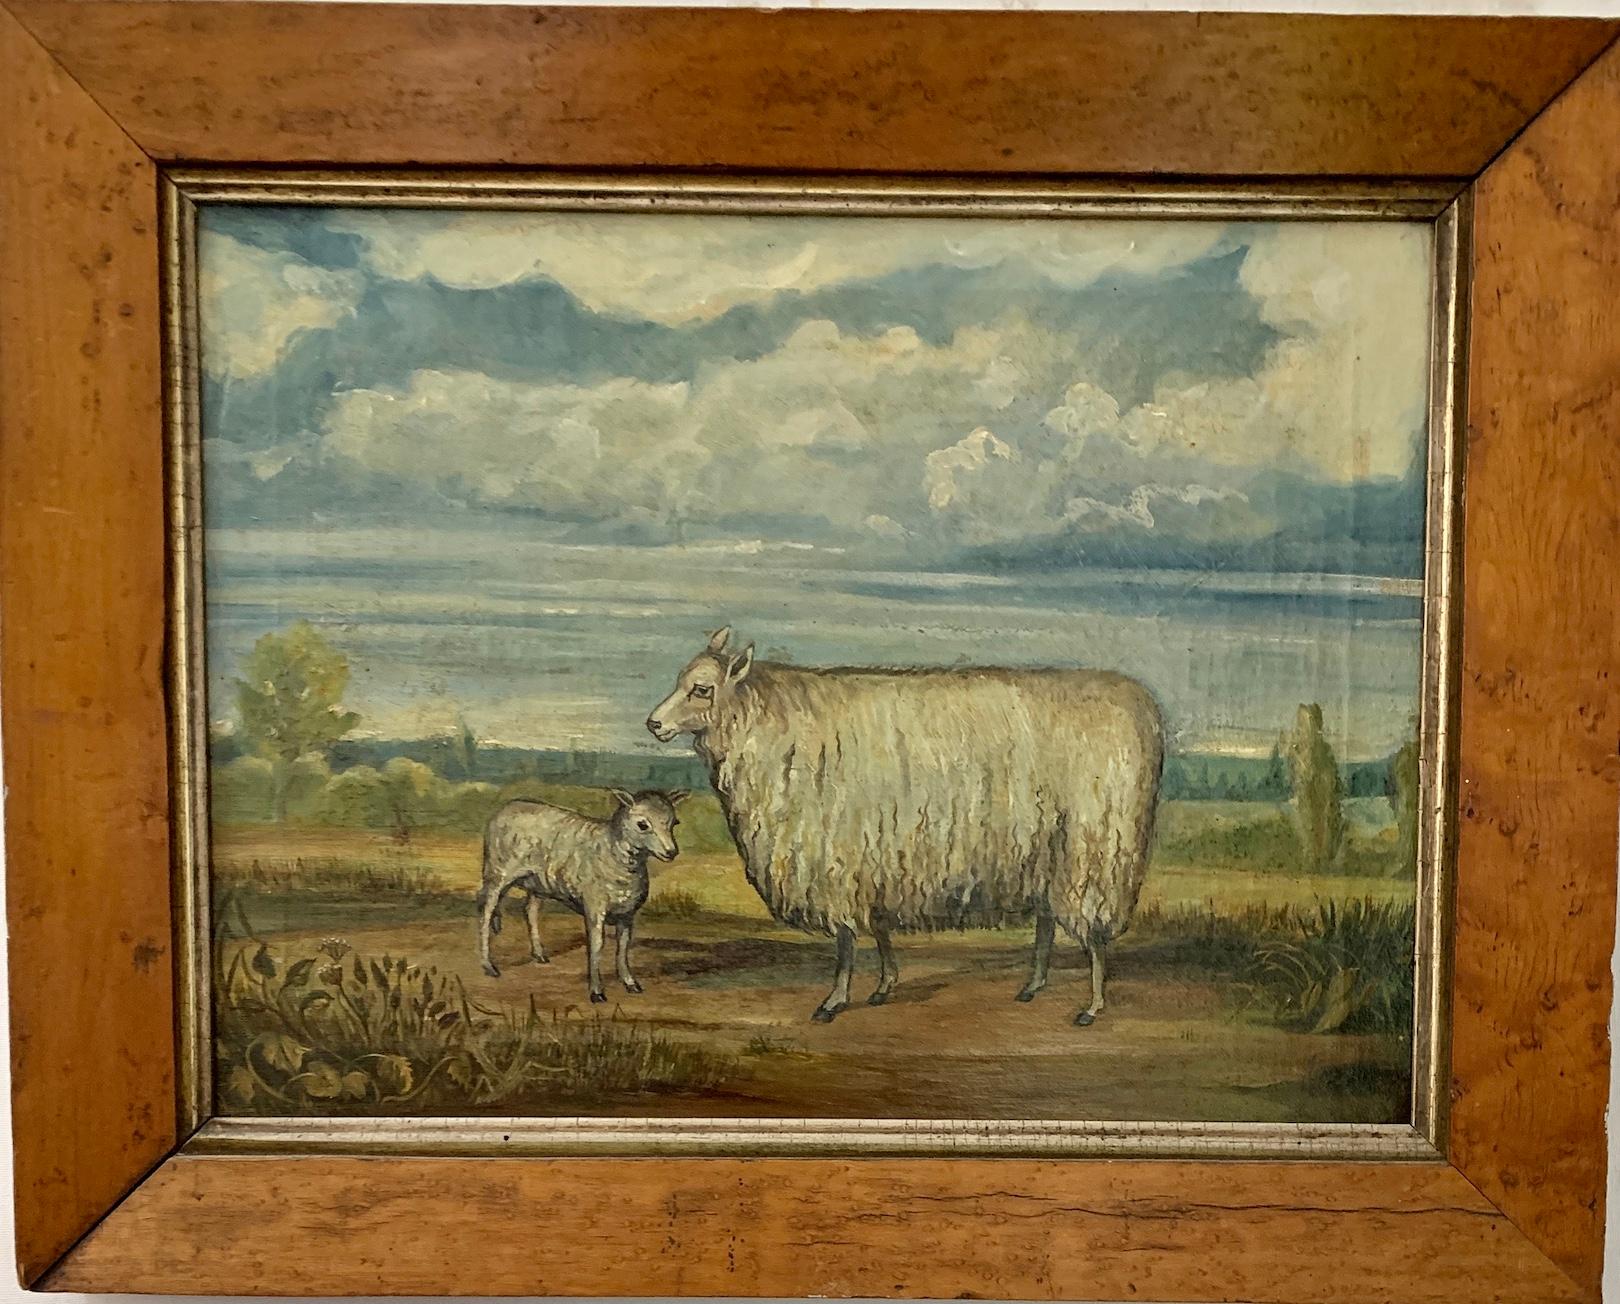 19th-century English Folk Art School, sheep and lamb in an extensive landscape. 

Classic English mid-19th-century folk art painting. The style was very popular from 1820-1880 and many great folk paintings were painted during this period. This is a